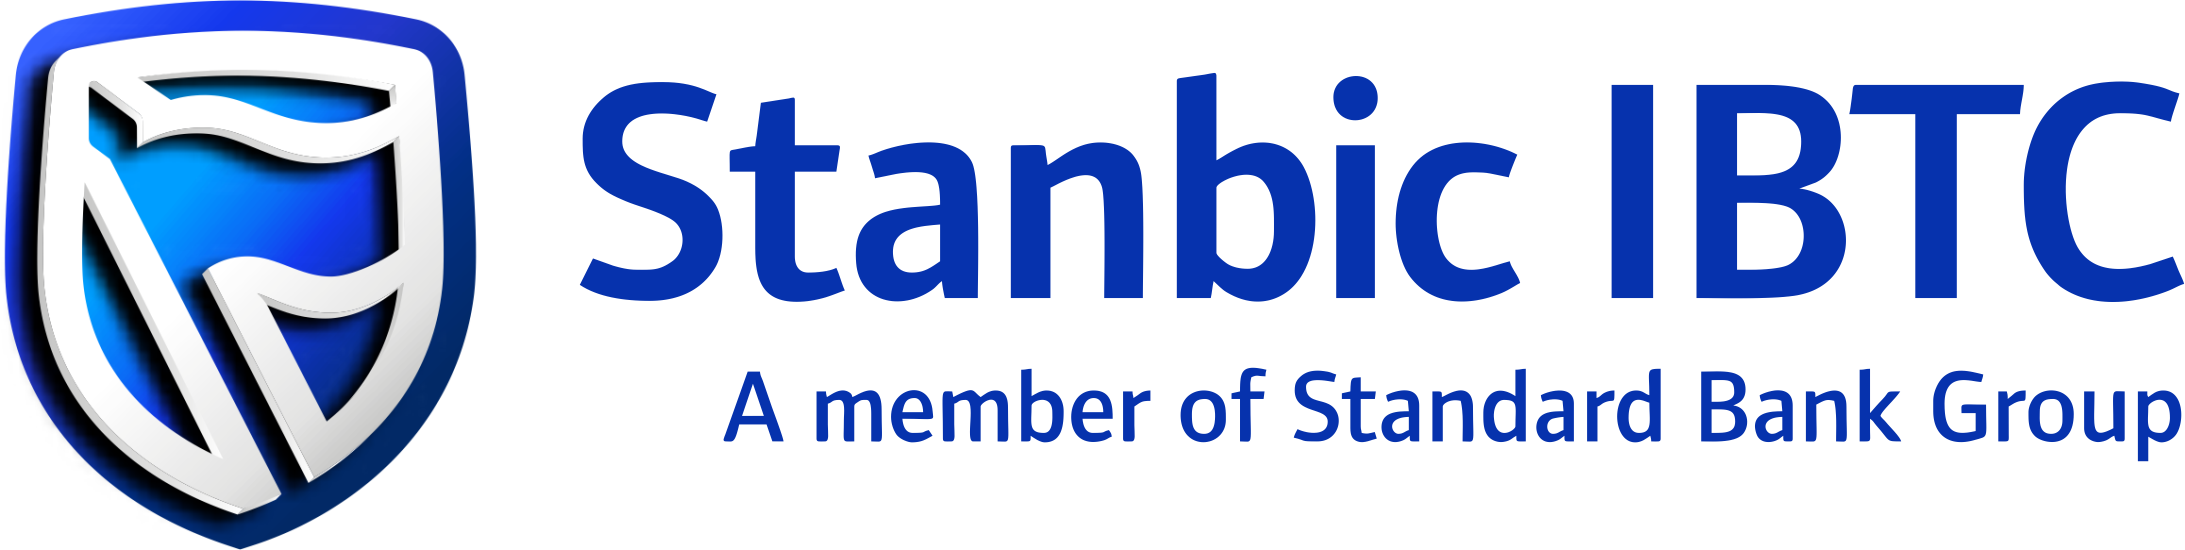 Stanbic IBTC Boosts Customer Experience with Digital Loans Solutions